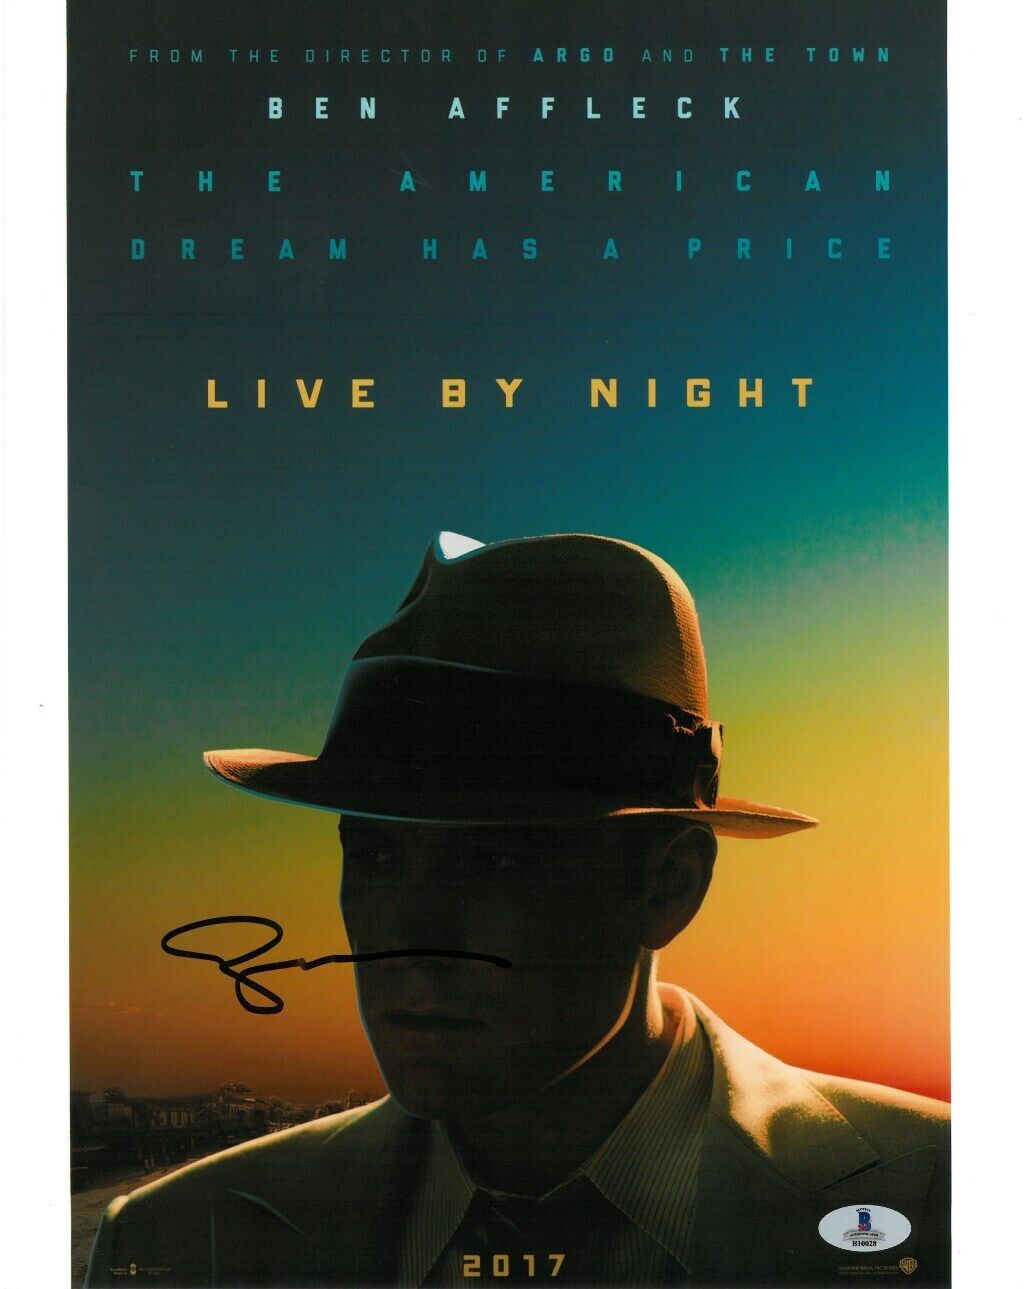 Ben Affleck Signed Live by Night Autographed 11x14 Photo Poster painting BECKETT #B10028